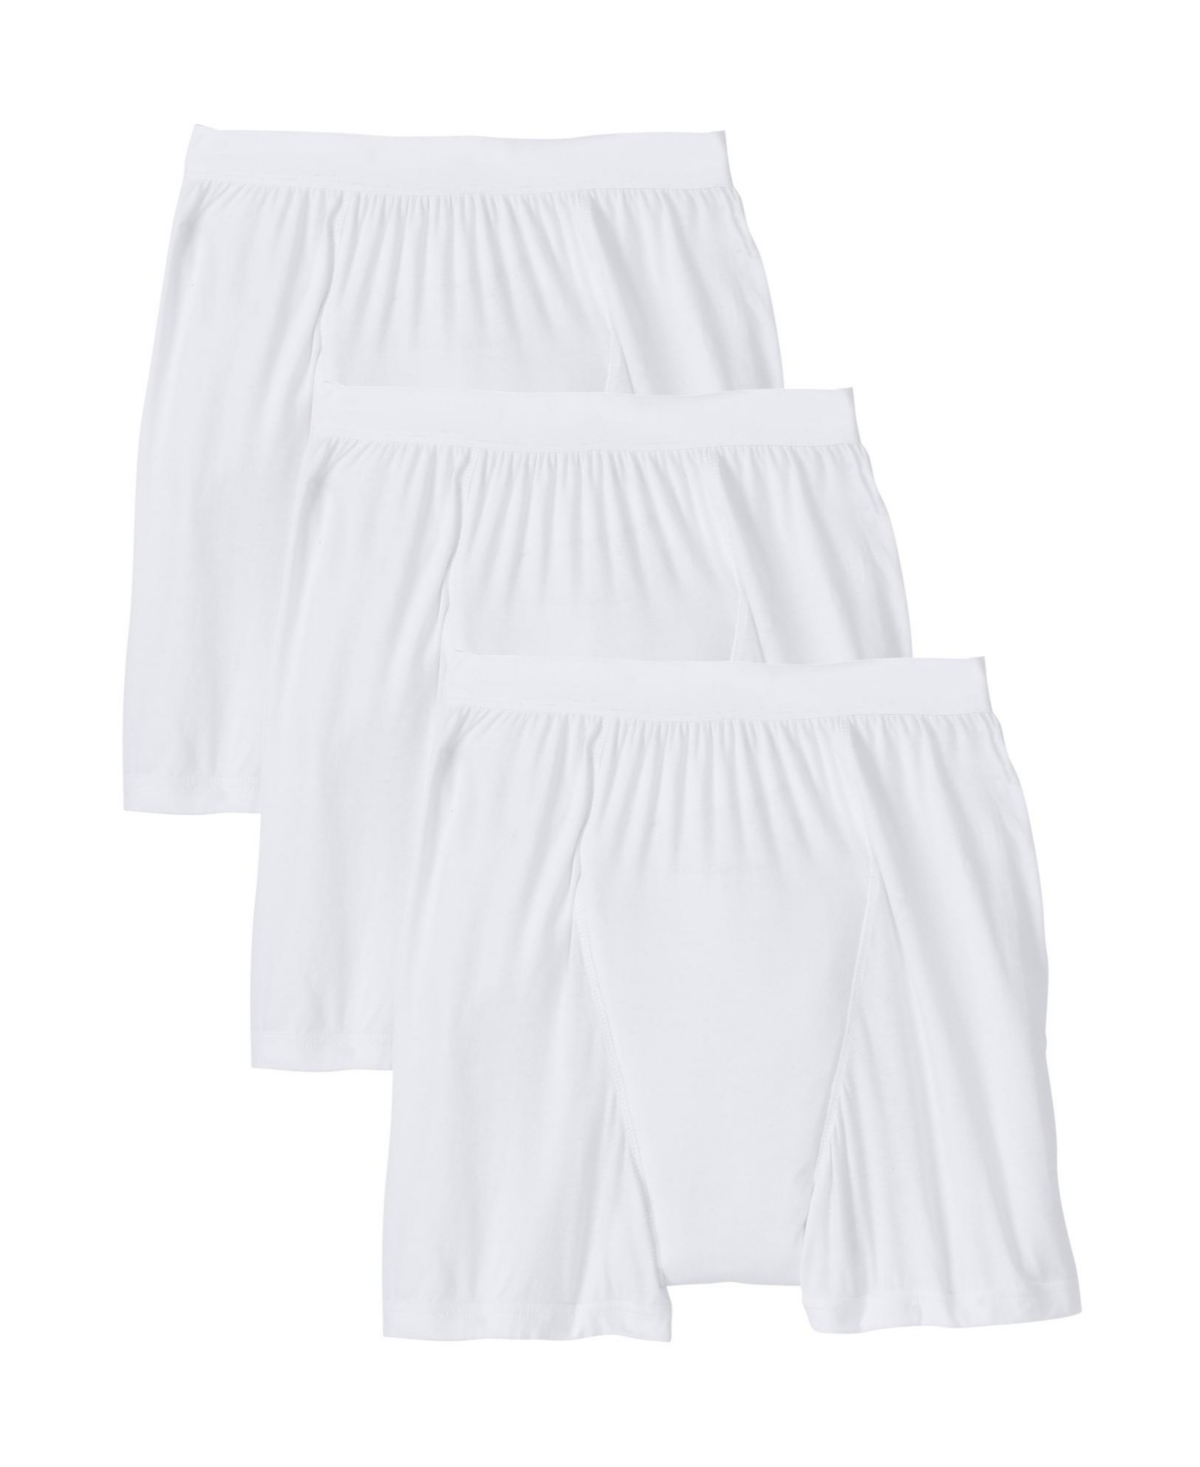 Big & Tall Leakproof Boxers 3-Pack - White